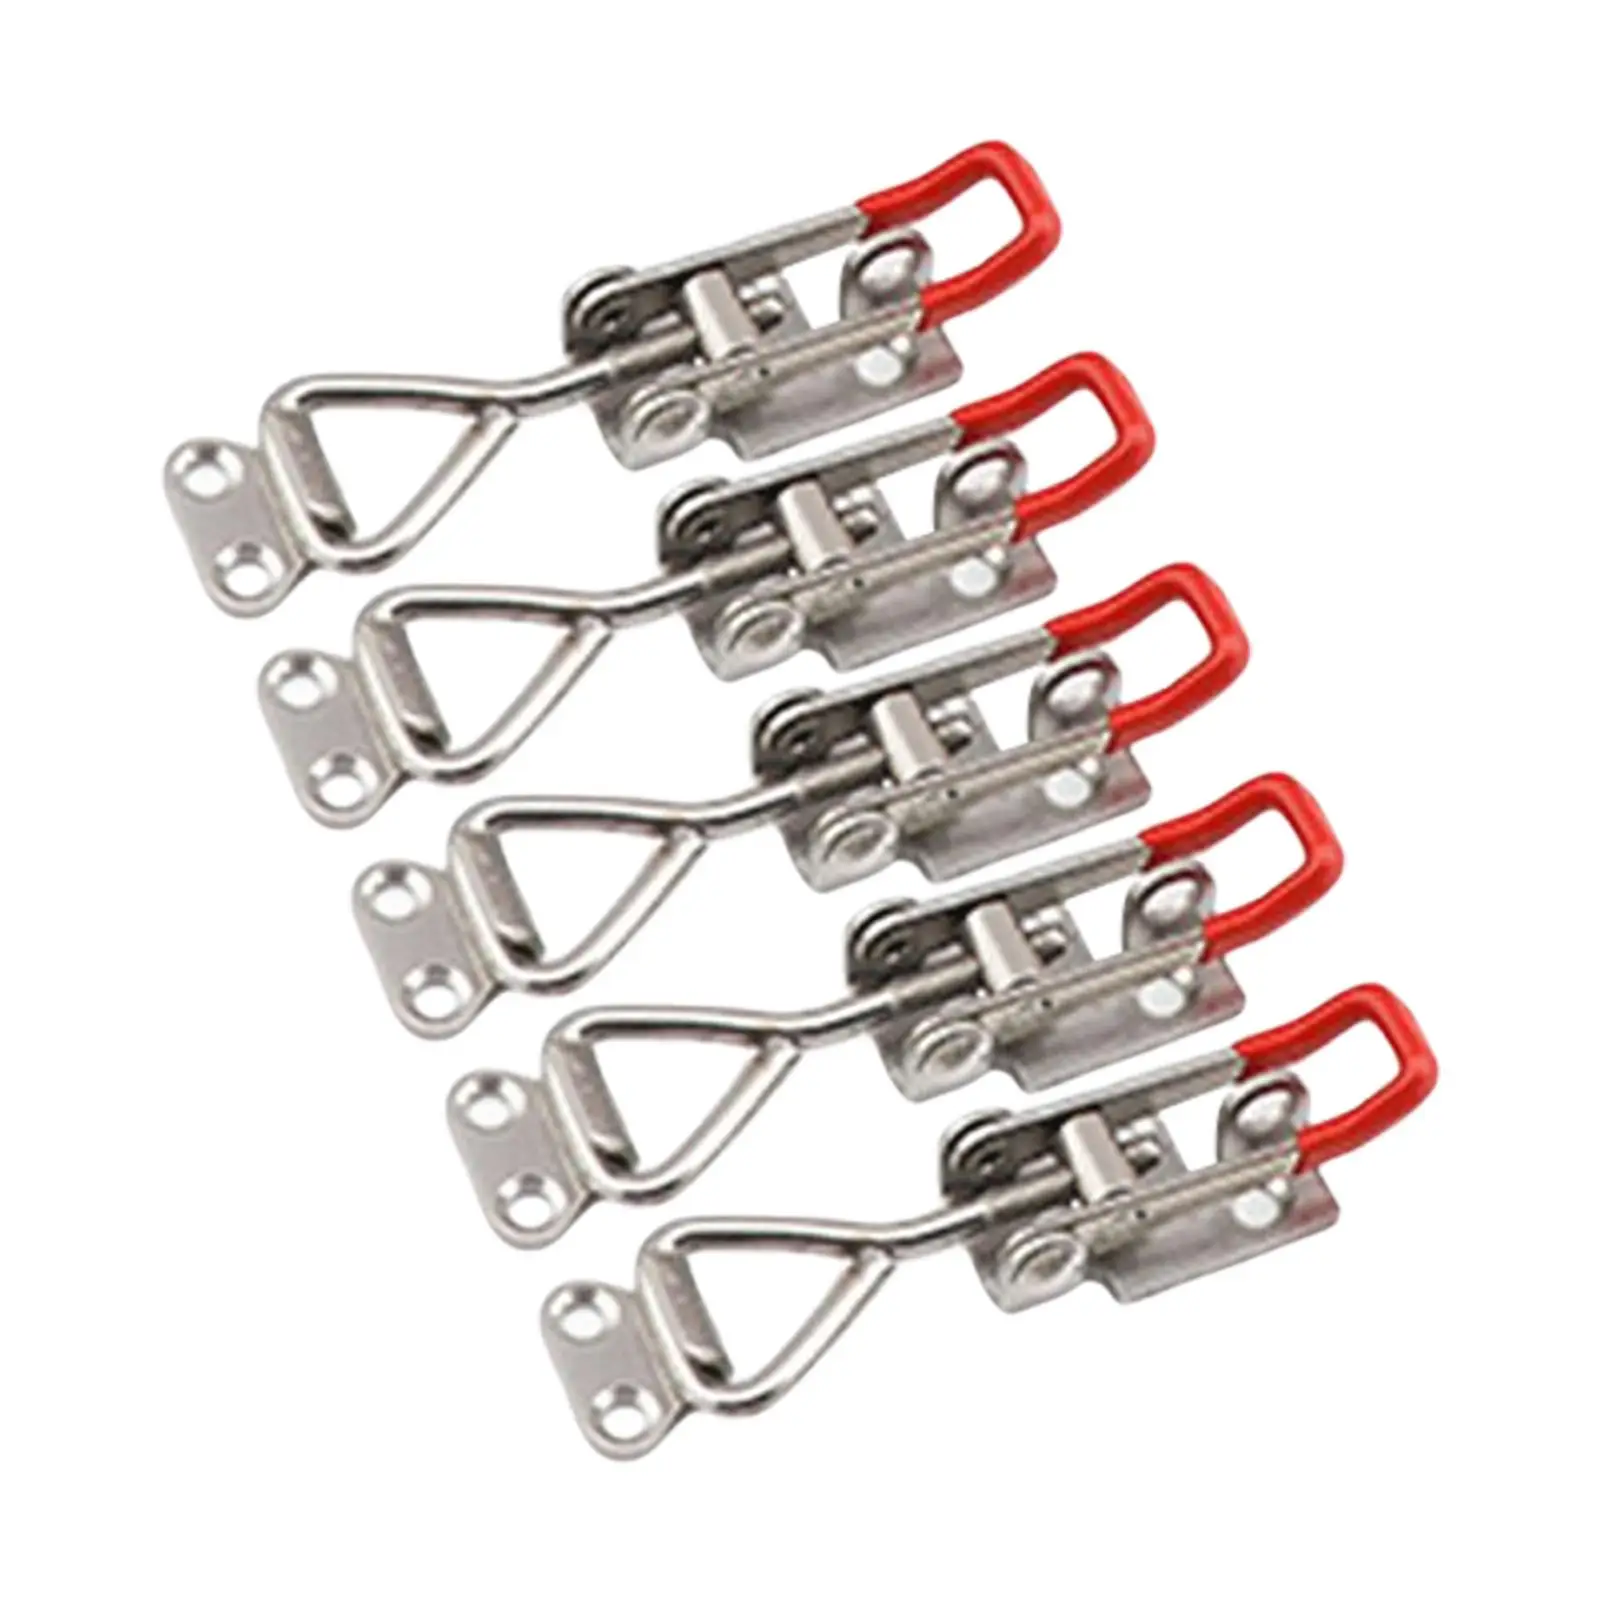 5Pcs Push Pull Toggle Clamp Stainless Steel Anti Slip Hand Tool Reliable Horizontal Sturdy for Home Sliding Door Woodworking